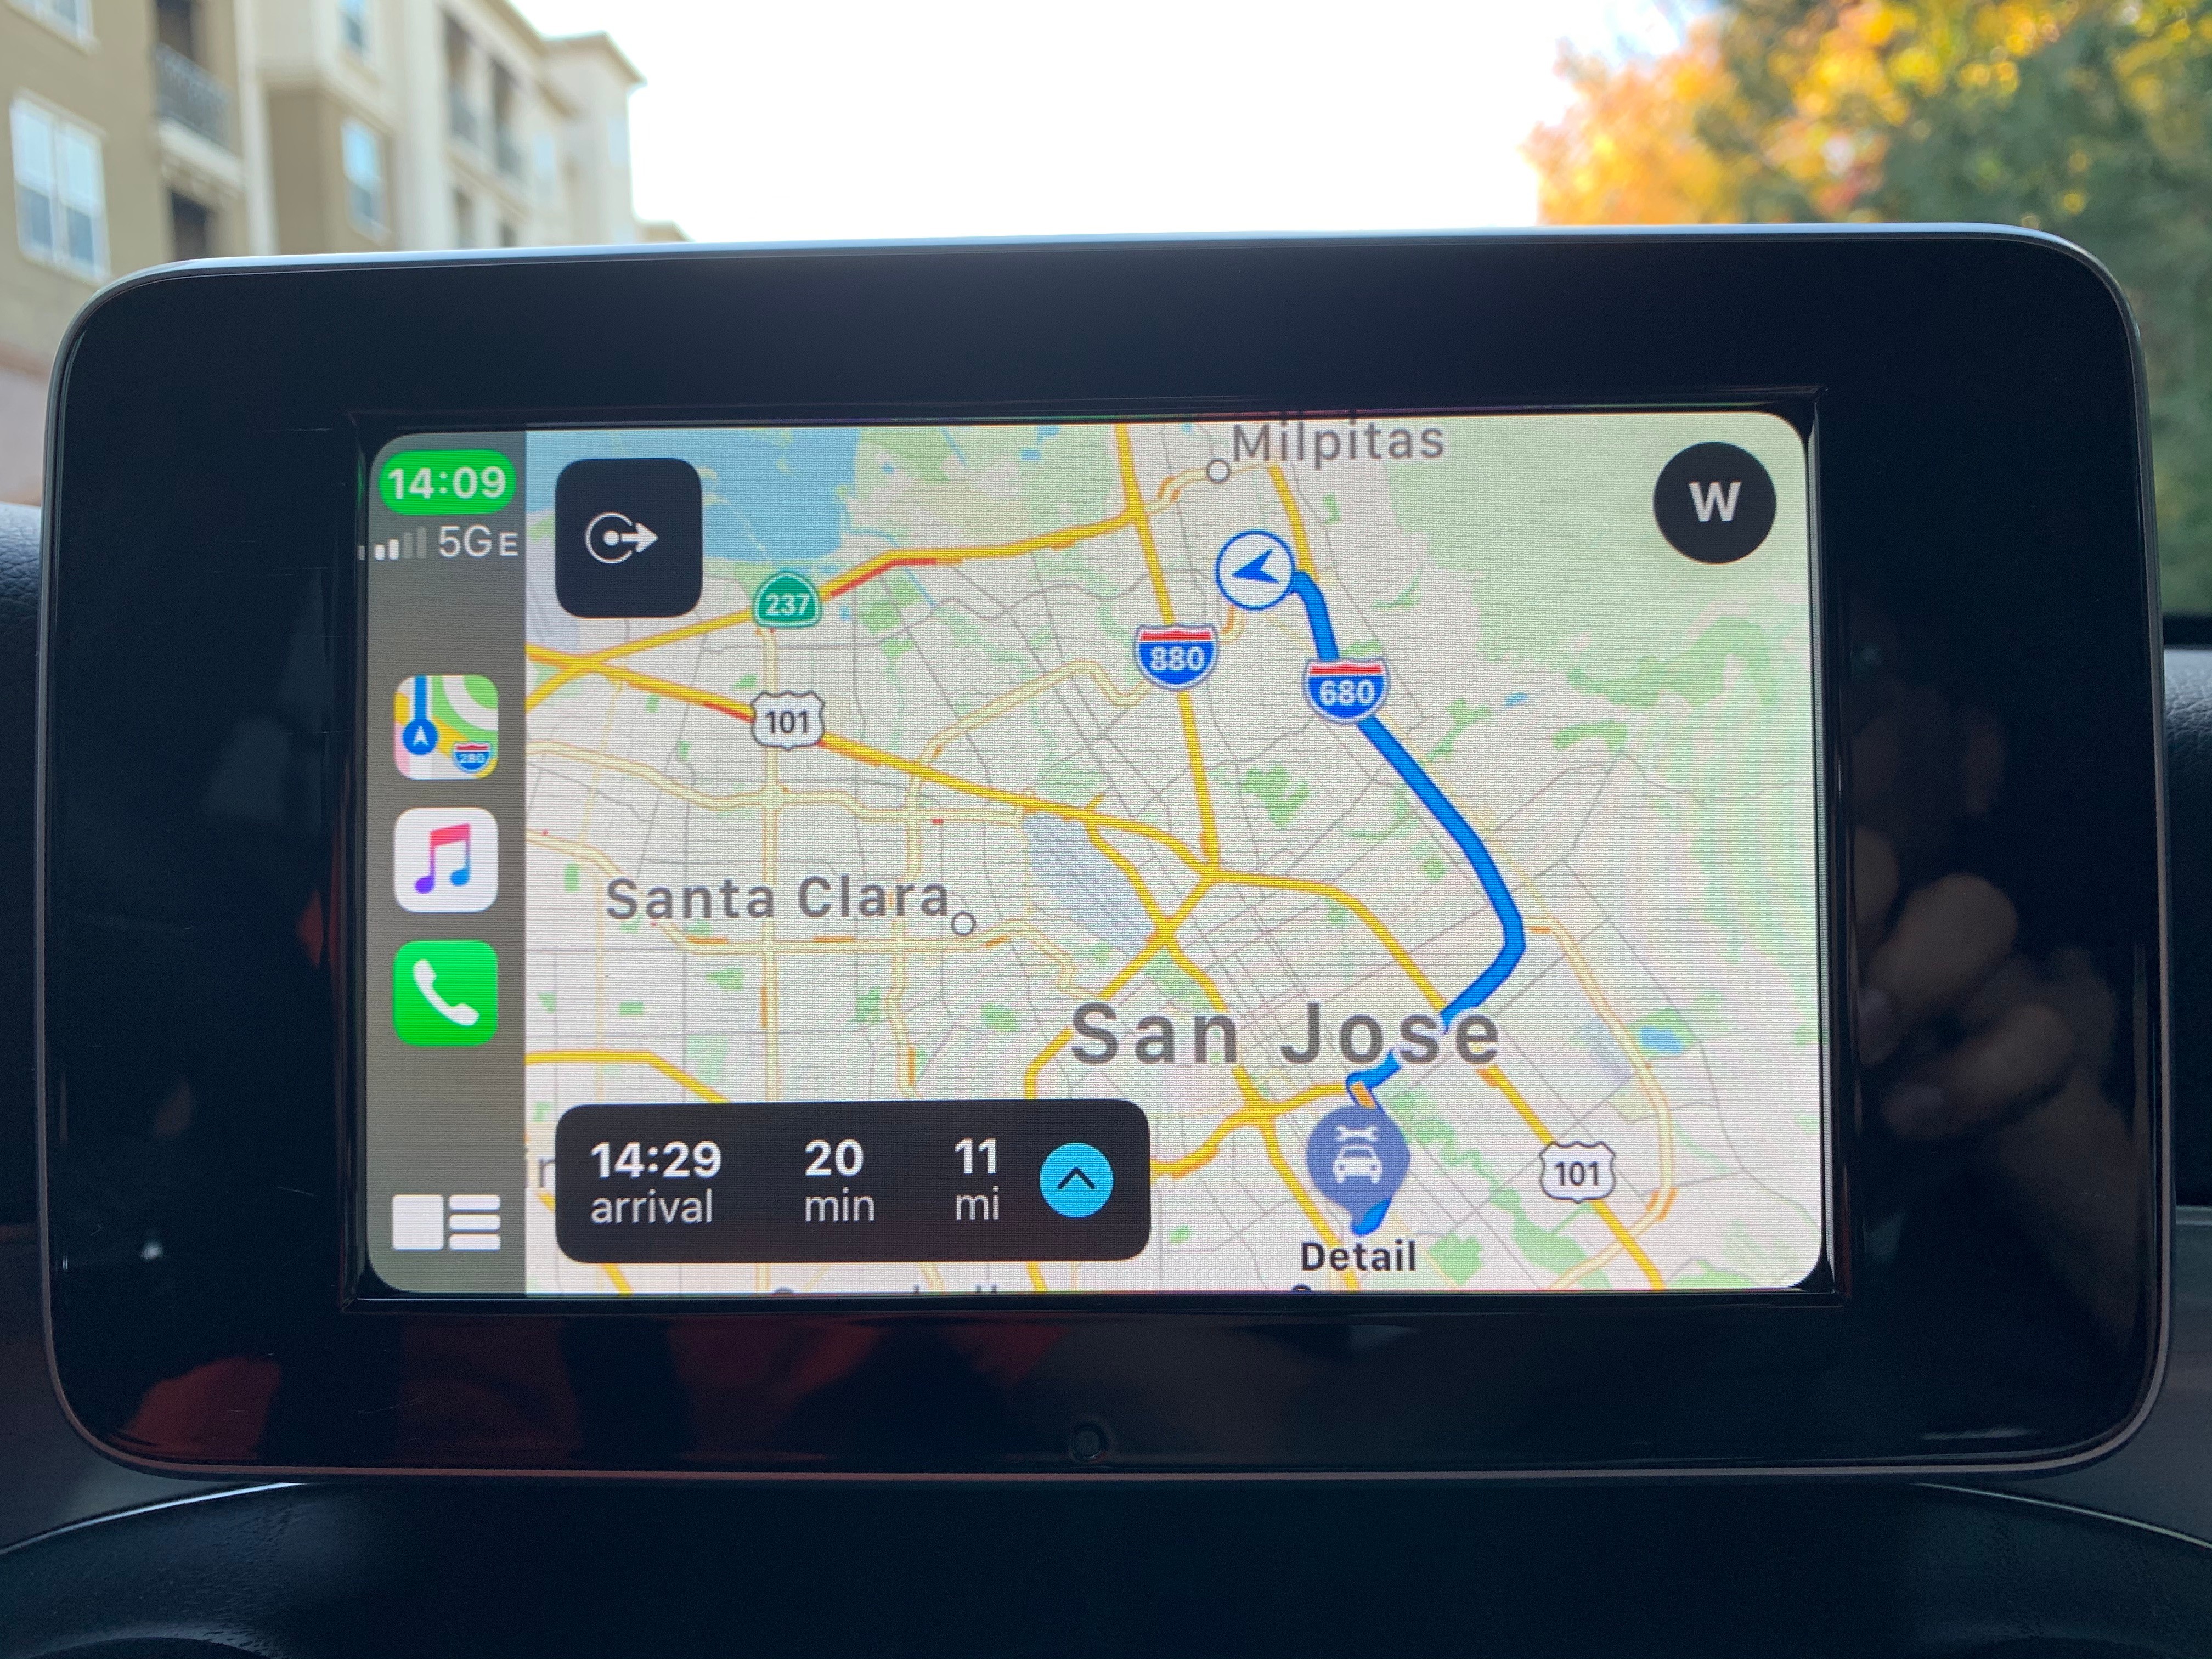 Get turn-by-turn directions with CarPlay - Apple Support